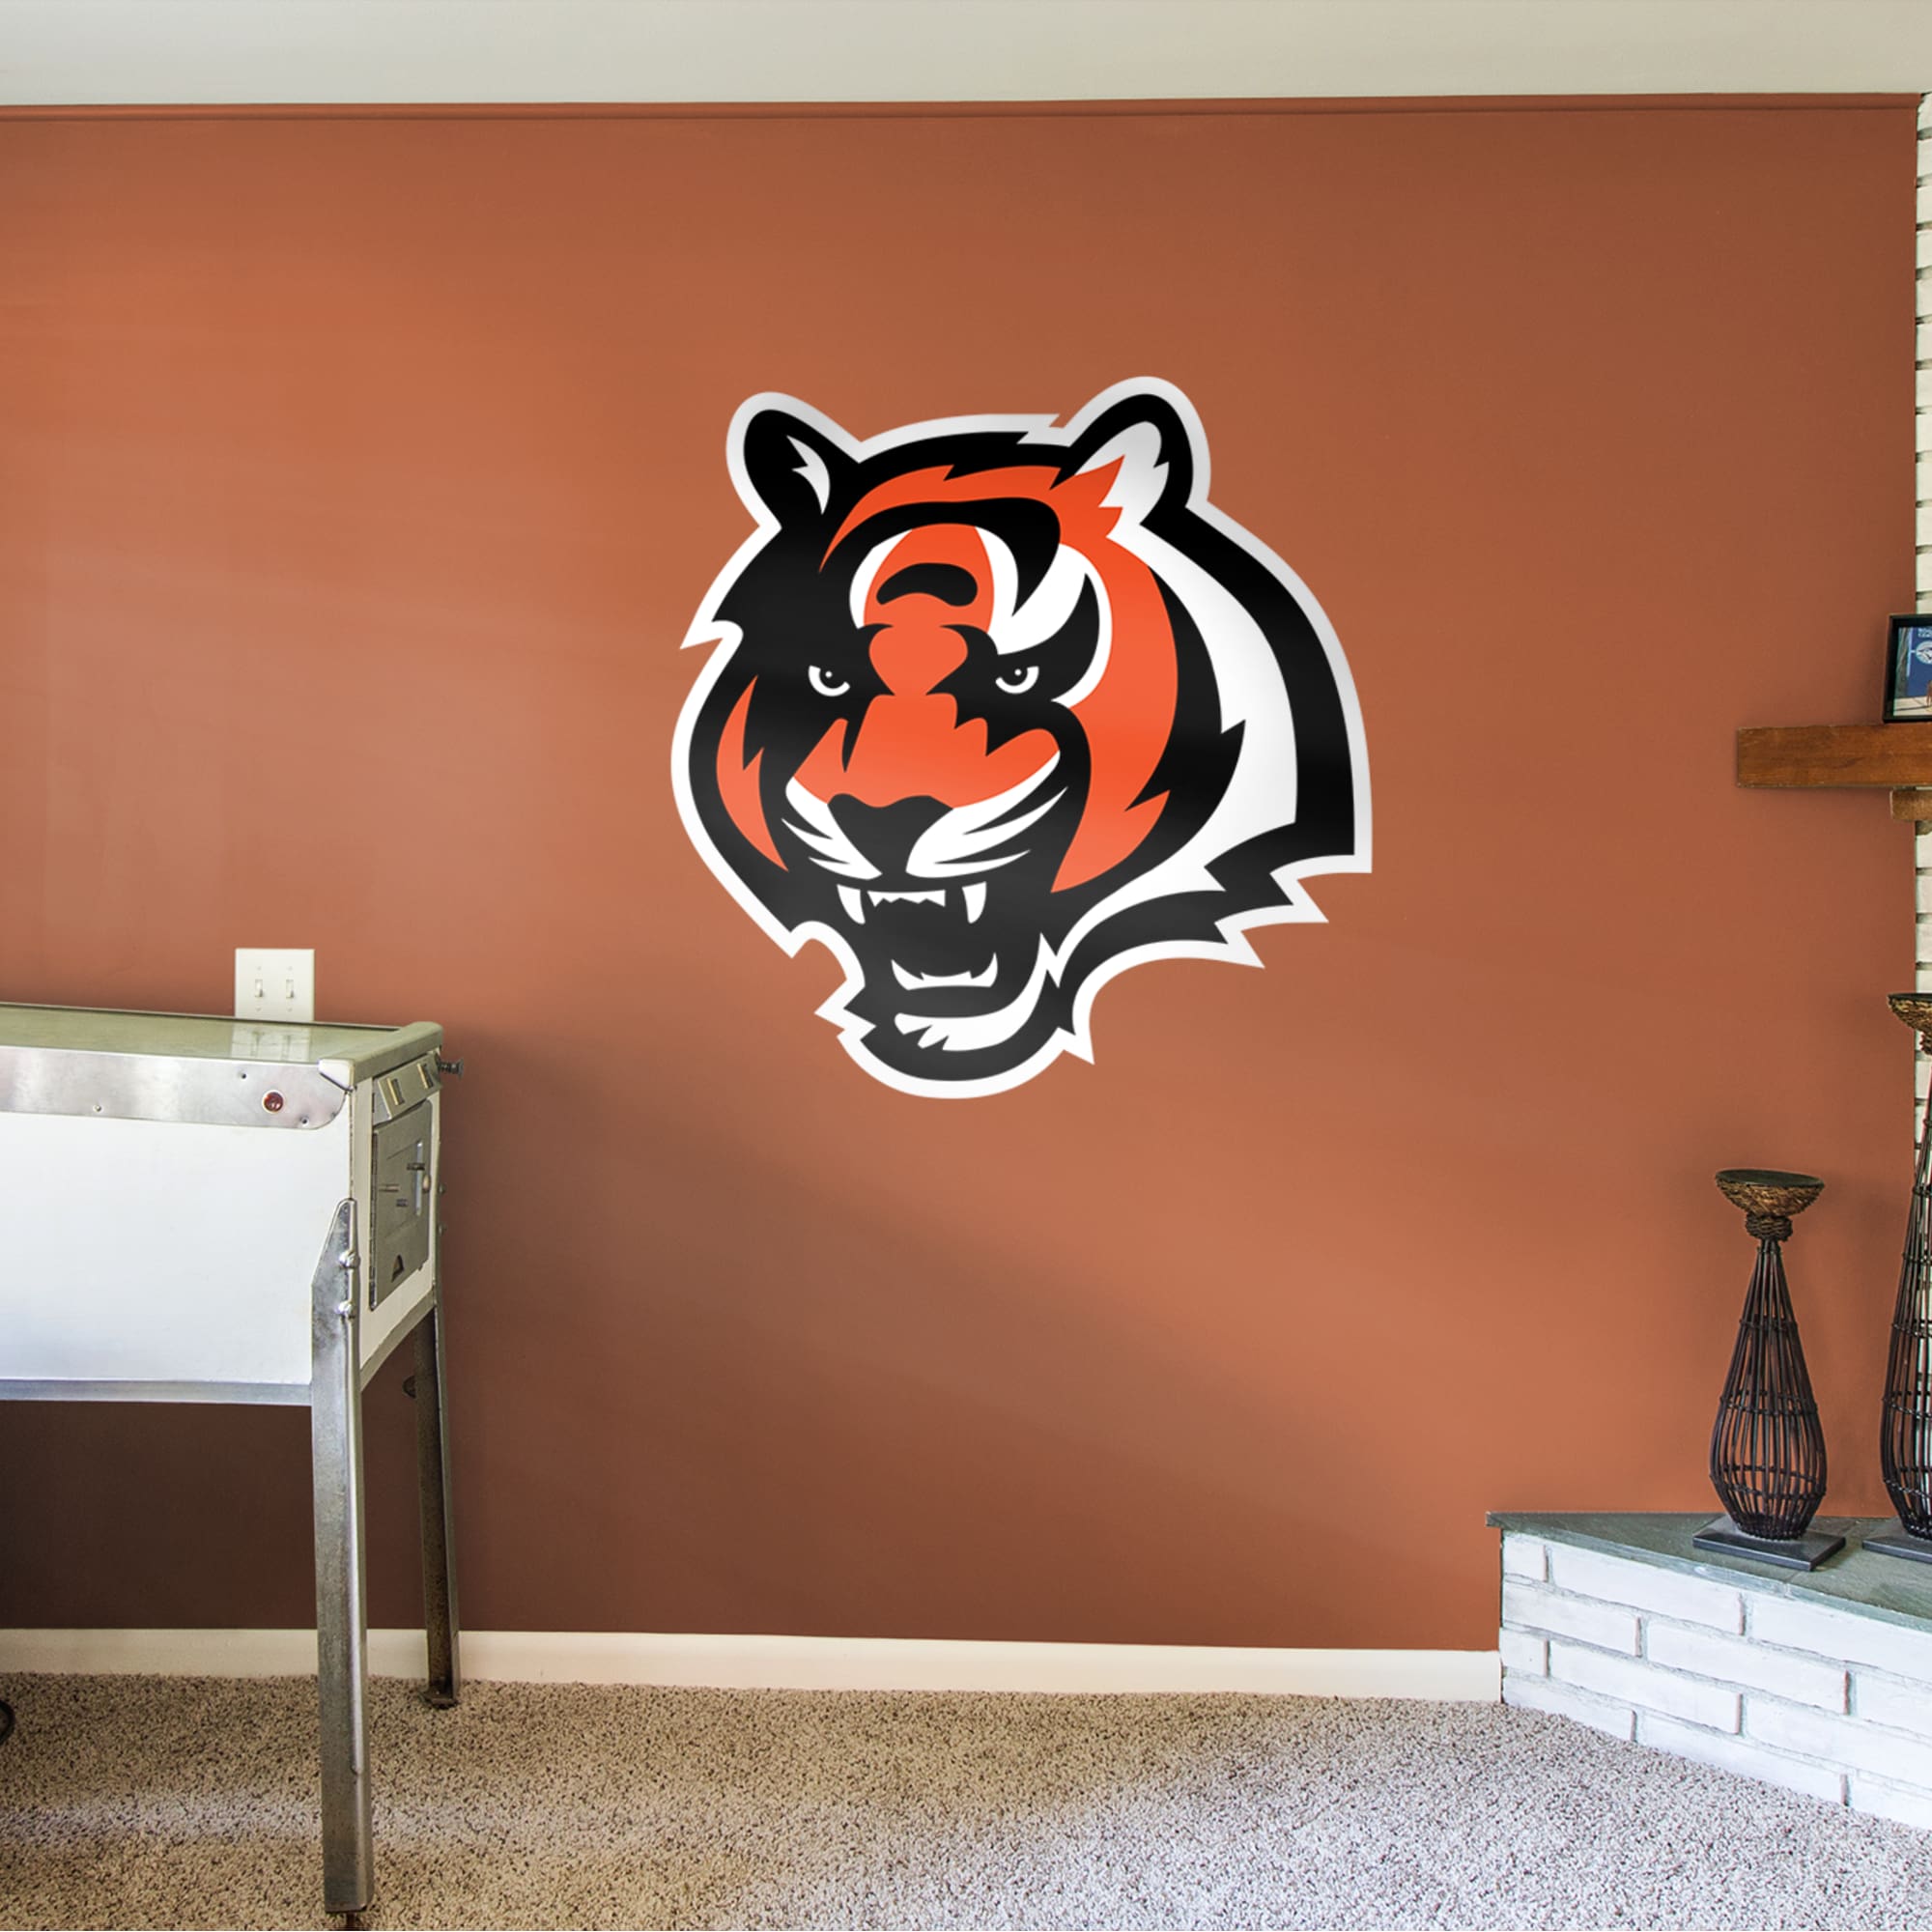 Cincinnati Bengals: Tiger Head Logo - Officially Licensed NFL Removable Wall Decal Giant Logo (39"W x 40"H) by Fathead | Vinyl